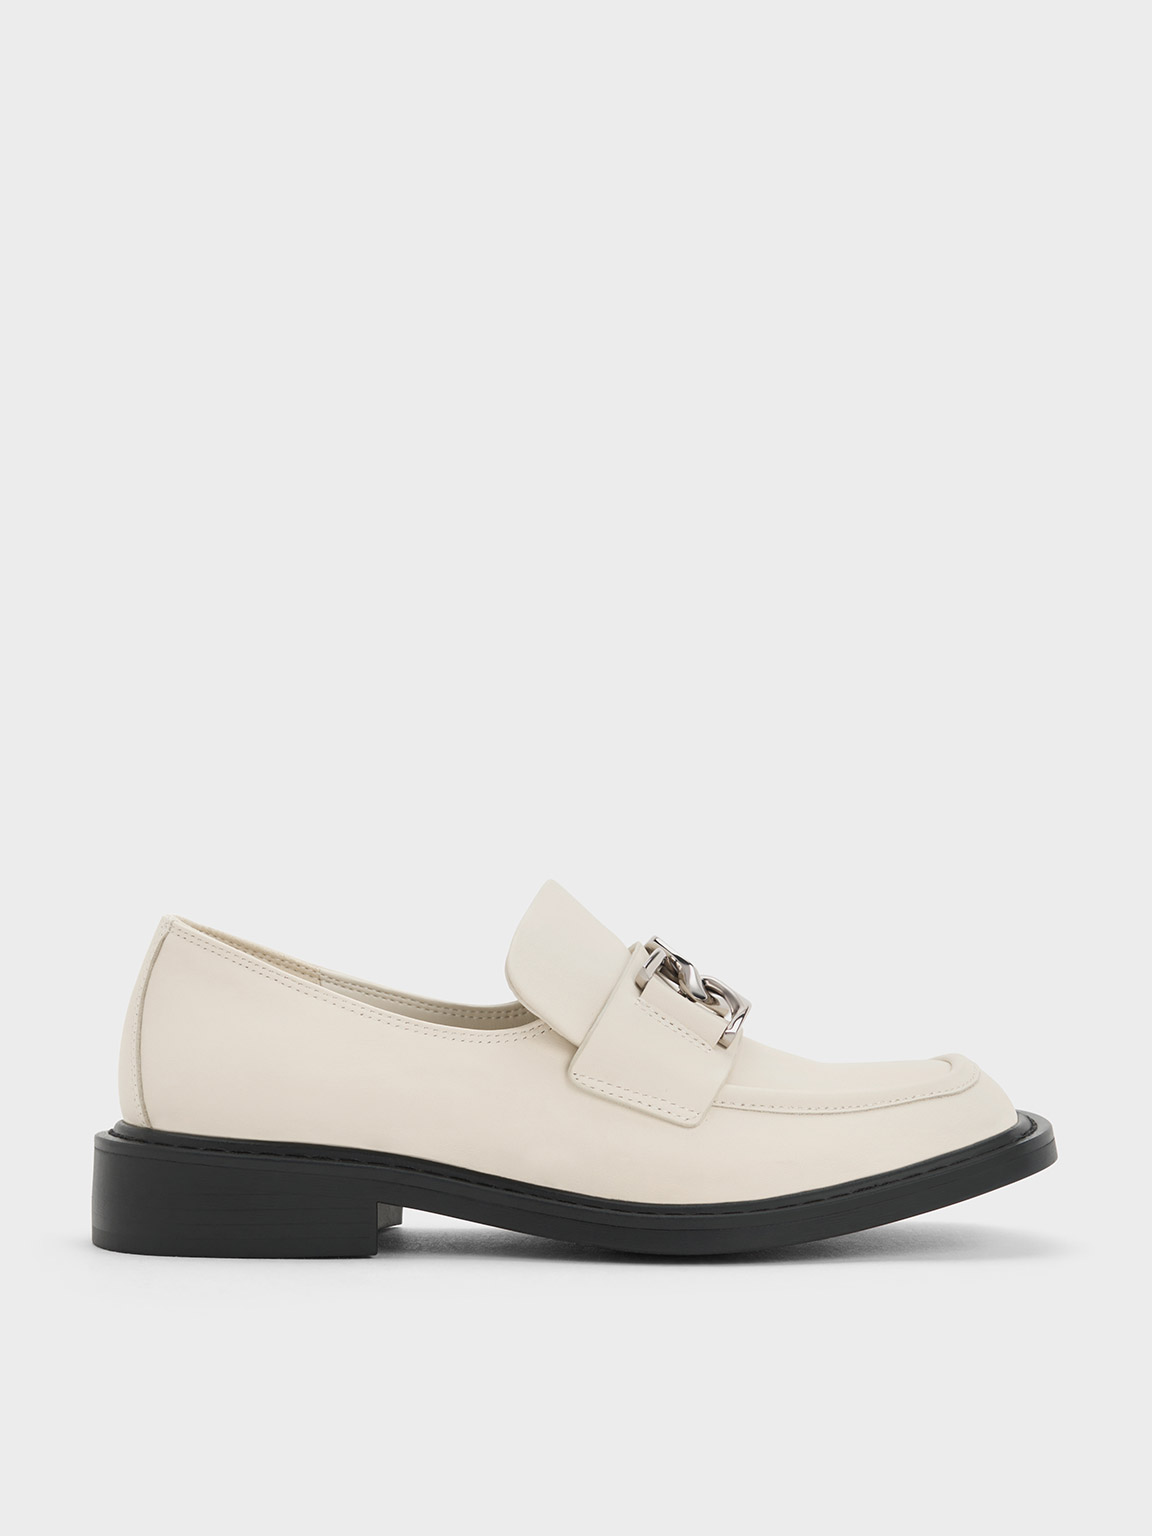 Charles & Keith Gabine Leather Loafers In Chalk